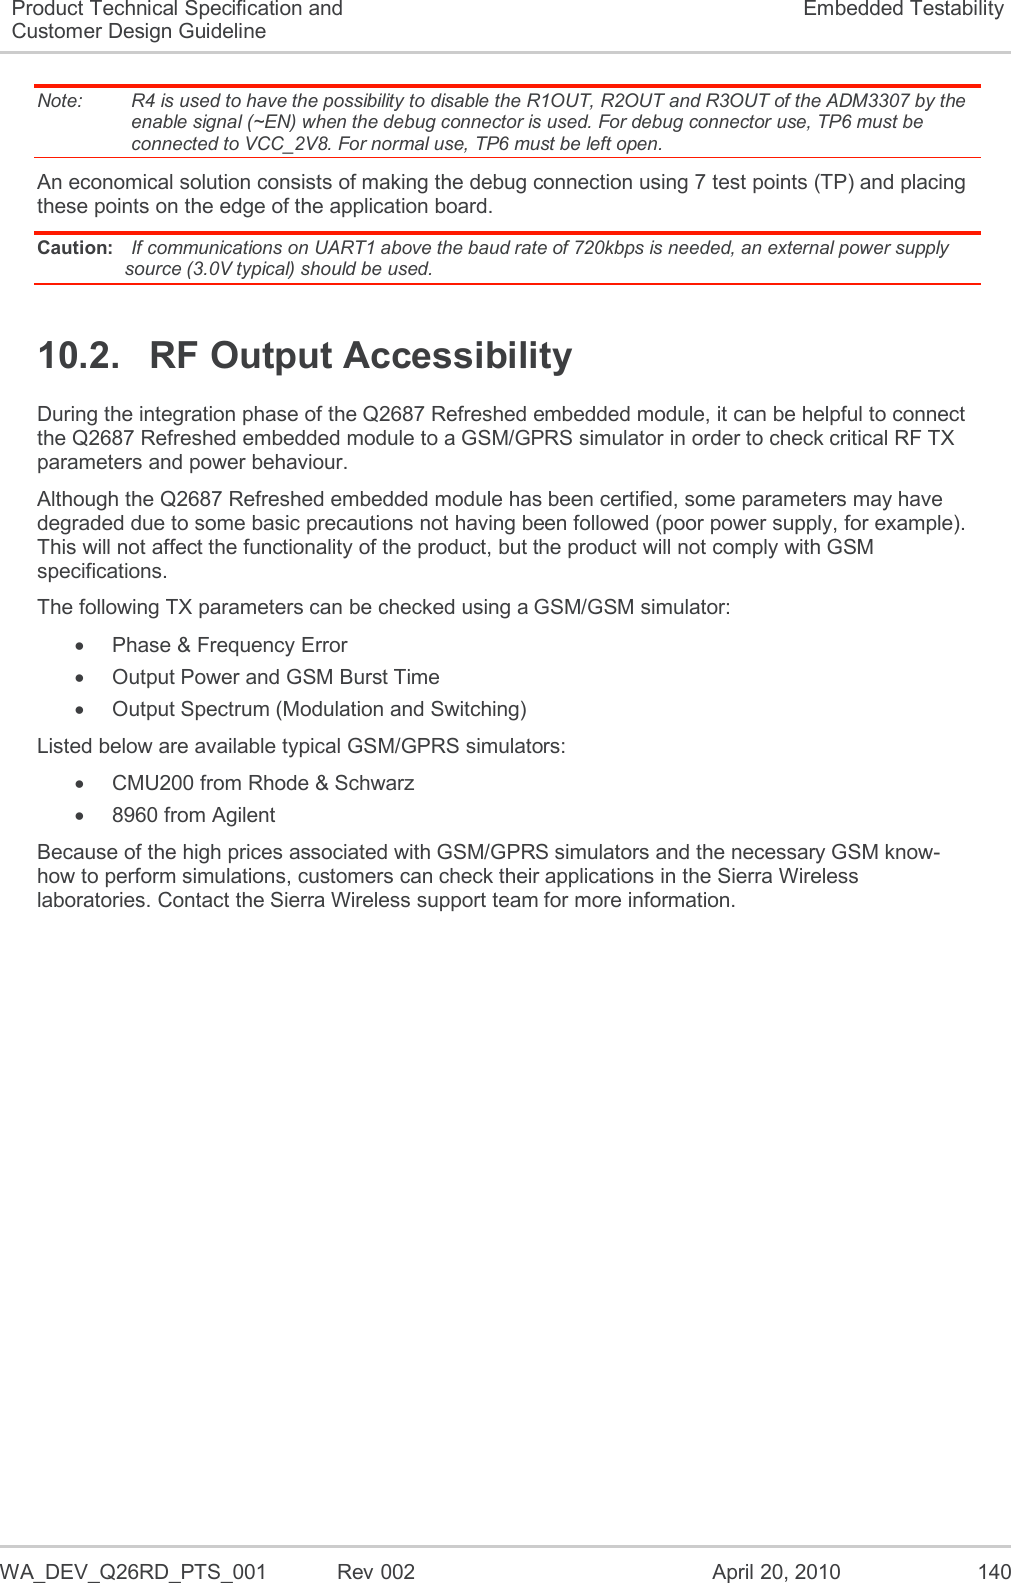   WA_DEV_Q26RD_PTS_001  Rev 002  April 20, 2010 140 Product Technical Specification and Customer Design Guideline Embedded Testability Note:   R4 is used to have the possibility to disable the R1OUT, R2OUT and R3OUT of the ADM3307 by the enable signal (~EN) when the debug connector is used. For debug connector use, TP6 must be connected to VCC_2V8. For normal use, TP6 must be left open. An economical solution consists of making the debug connection using 7 test points (TP) and placing these points on the edge of the application board. Caution:  If communications on UART1 above the baud rate of 720kbps is needed, an external power supply source (3.0V typical) should be used. 10.2.  RF Output Accessibility During the integration phase of the Q2687 Refreshed embedded module, it can be helpful to connect the Q2687 Refreshed embedded module to a GSM/GPRS simulator in order to check critical RF TX parameters and power behaviour. Although the Q2687 Refreshed embedded module has been certified, some parameters may have degraded due to some basic precautions not having been followed (poor power supply, for example). This will not affect the functionality of the product, but the product will not comply with GSM specifications. The following TX parameters can be checked using a GSM/GSM simulator:   Phase &amp; Frequency Error   Output Power and GSM Burst Time   Output Spectrum (Modulation and Switching) Listed below are available typical GSM/GPRS simulators:   CMU200 from Rhode &amp; Schwarz   8960 from Agilent Because of the high prices associated with GSM/GPRS simulators and the necessary GSM know-how to perform simulations, customers can check their applications in the Sierra Wireless laboratories. Contact the Sierra Wireless support team for more information.  